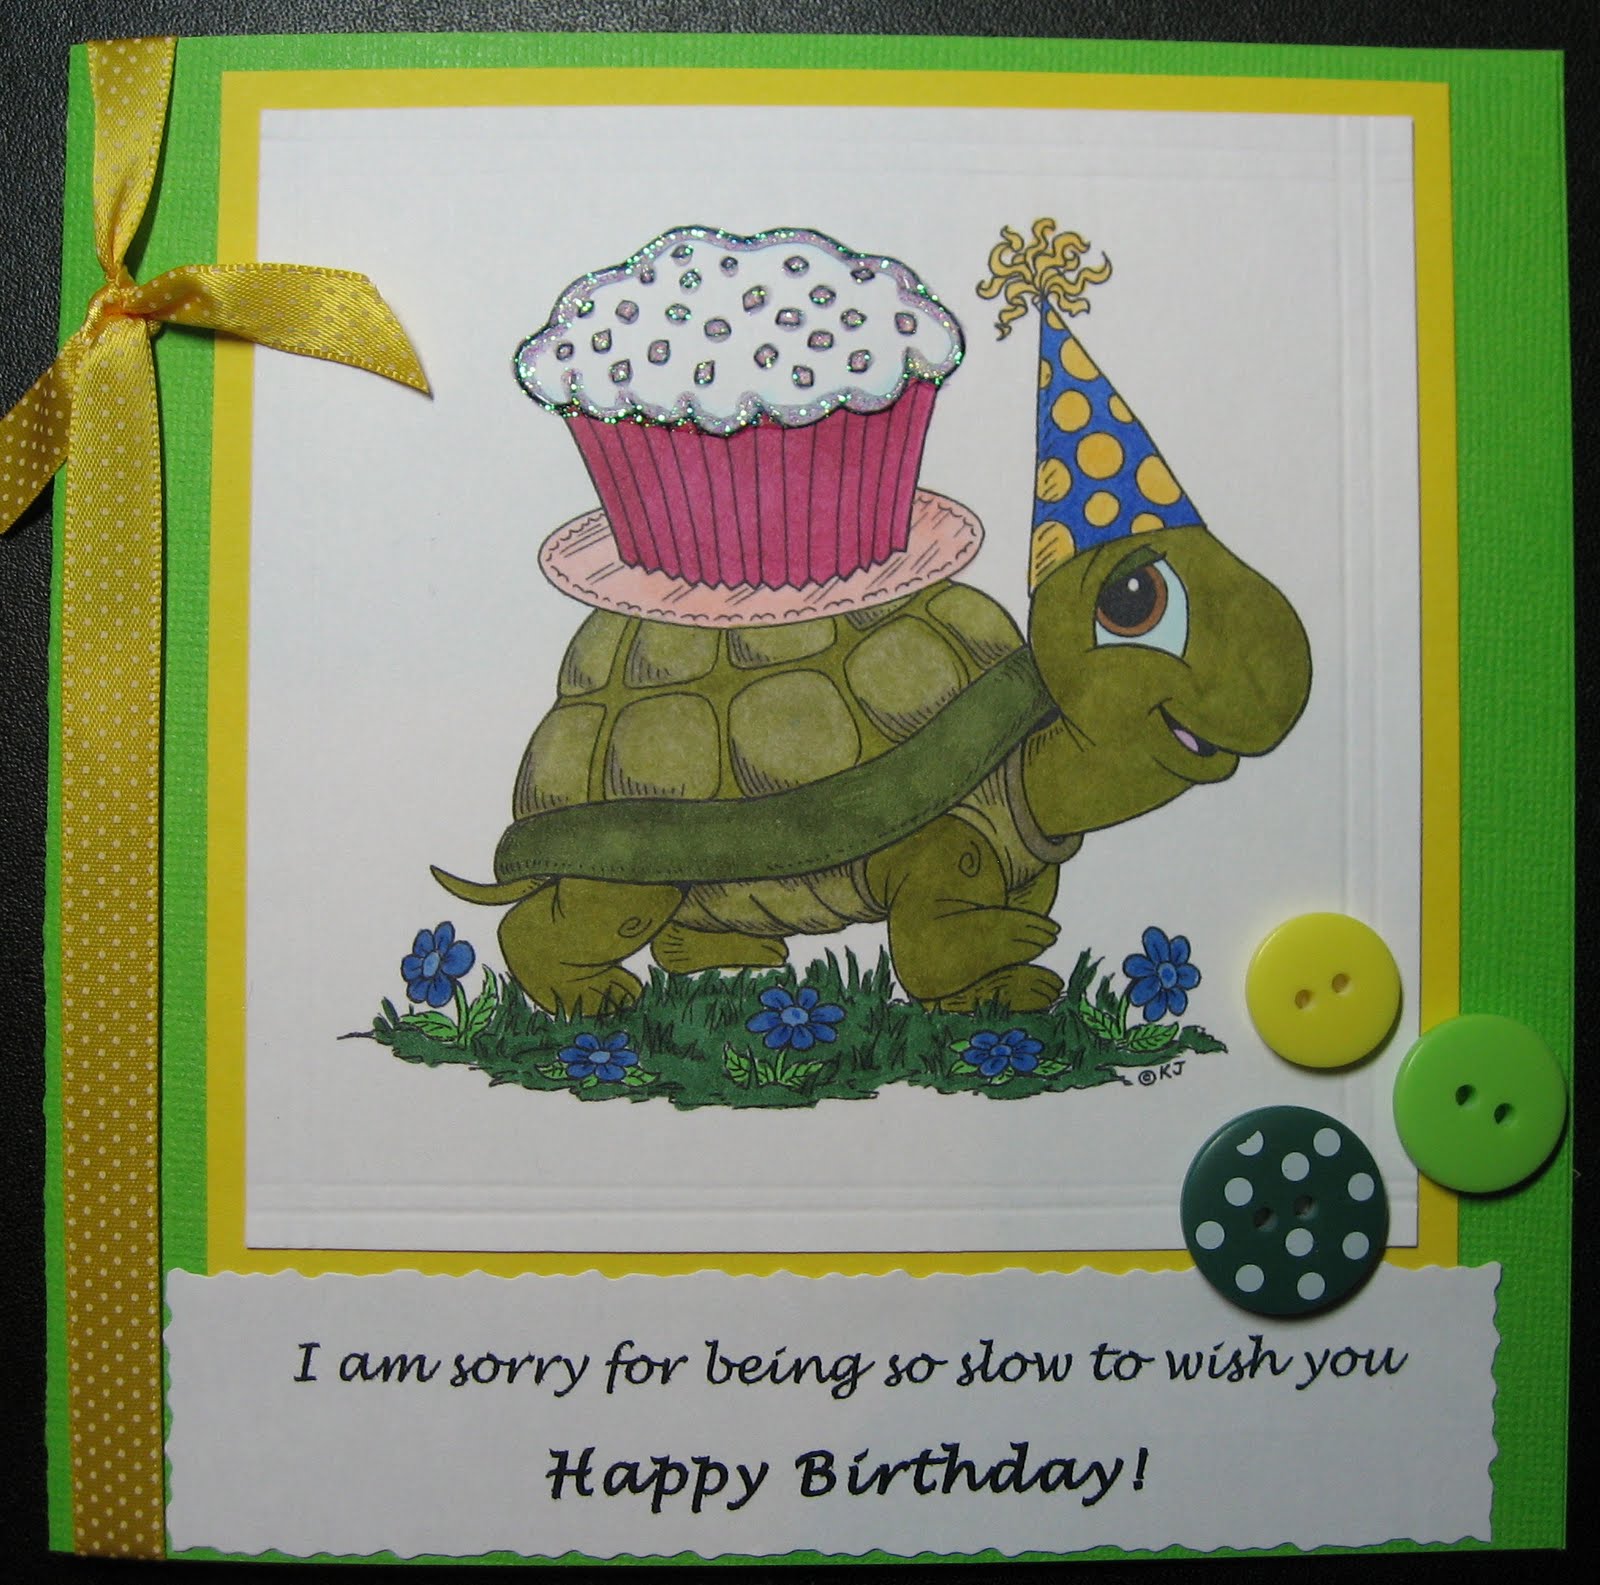 I Am Sorry For Being So Slow To Wish You Happy Birthday Greeting Card